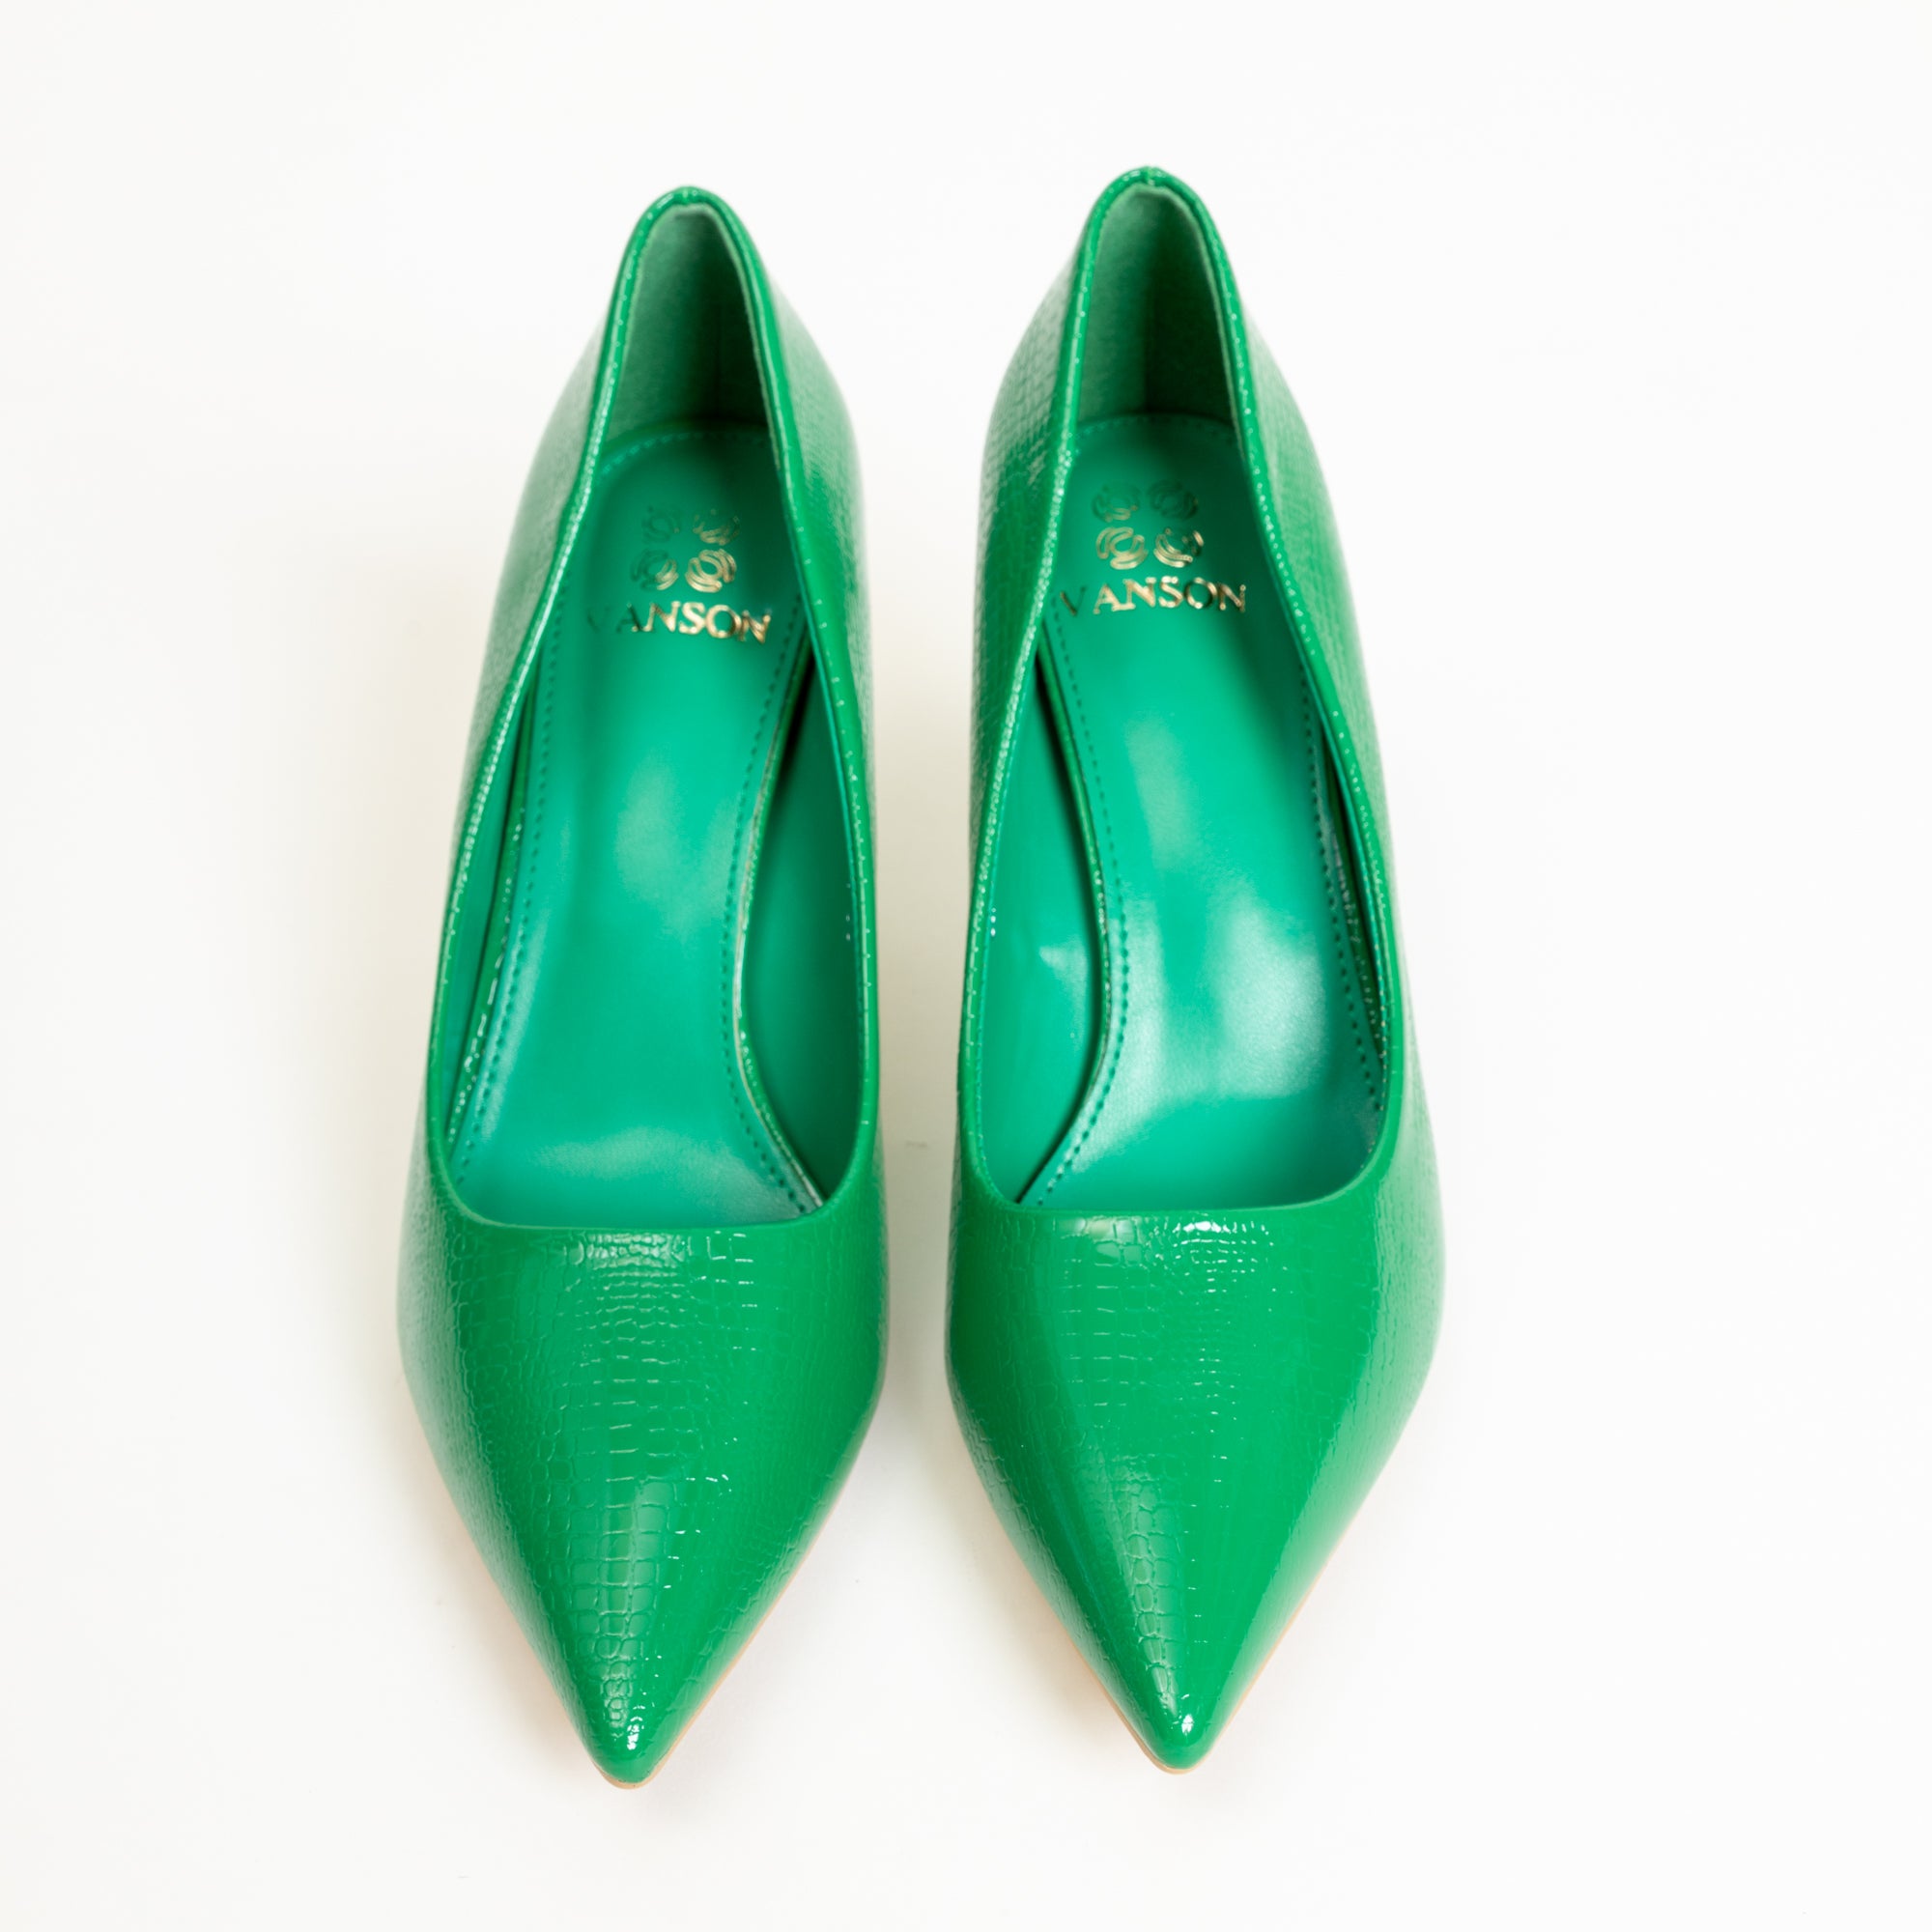 PEACOCK GREEN-Pumps in-Green